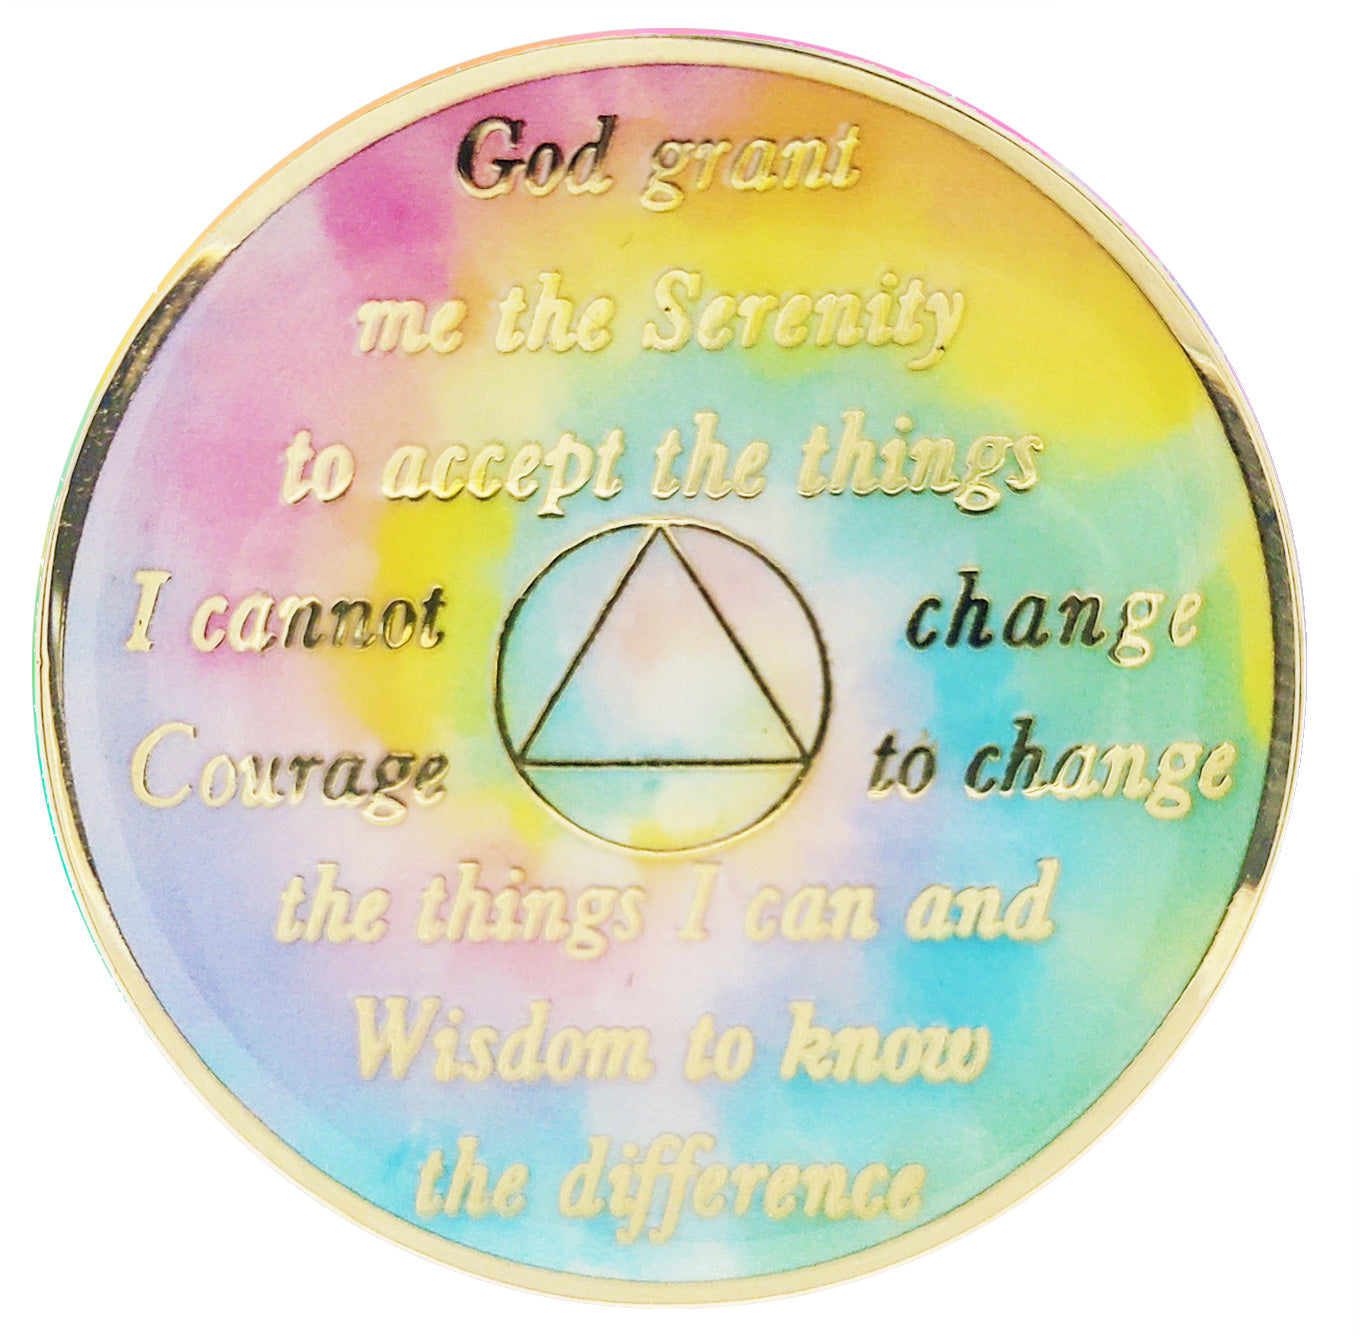 Back of AA psychic-delic change medallion, recovery medallion is tie-dye and has the raised serenity prayer, outer rim, and the circle triangle in the center in 14k gold.